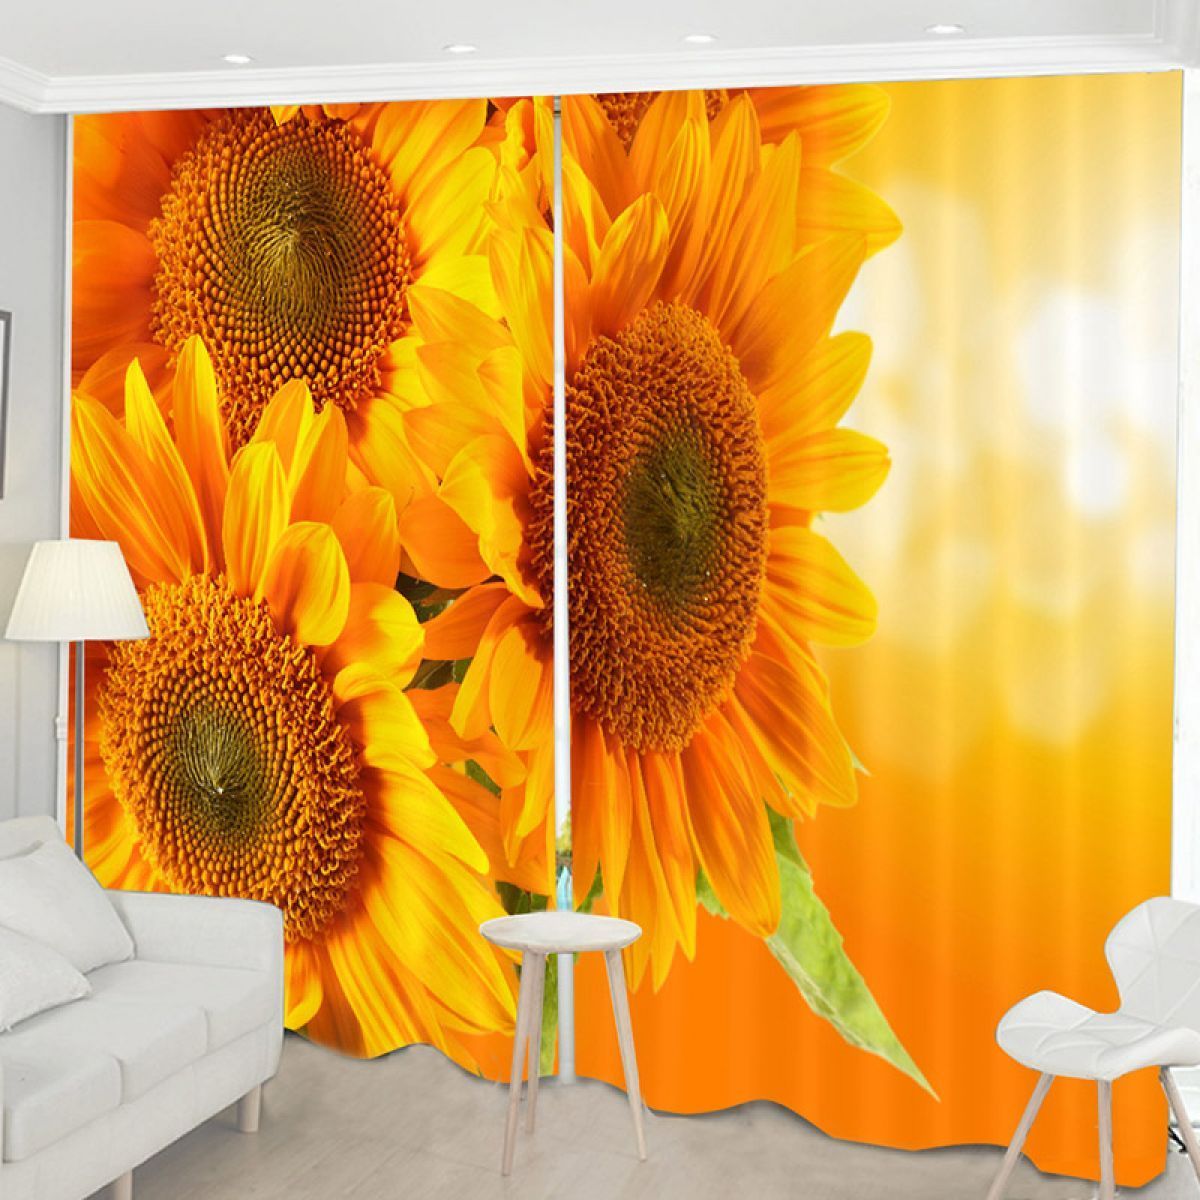 3d Close Up Sunflowers Printed Window Curtain Home Decor